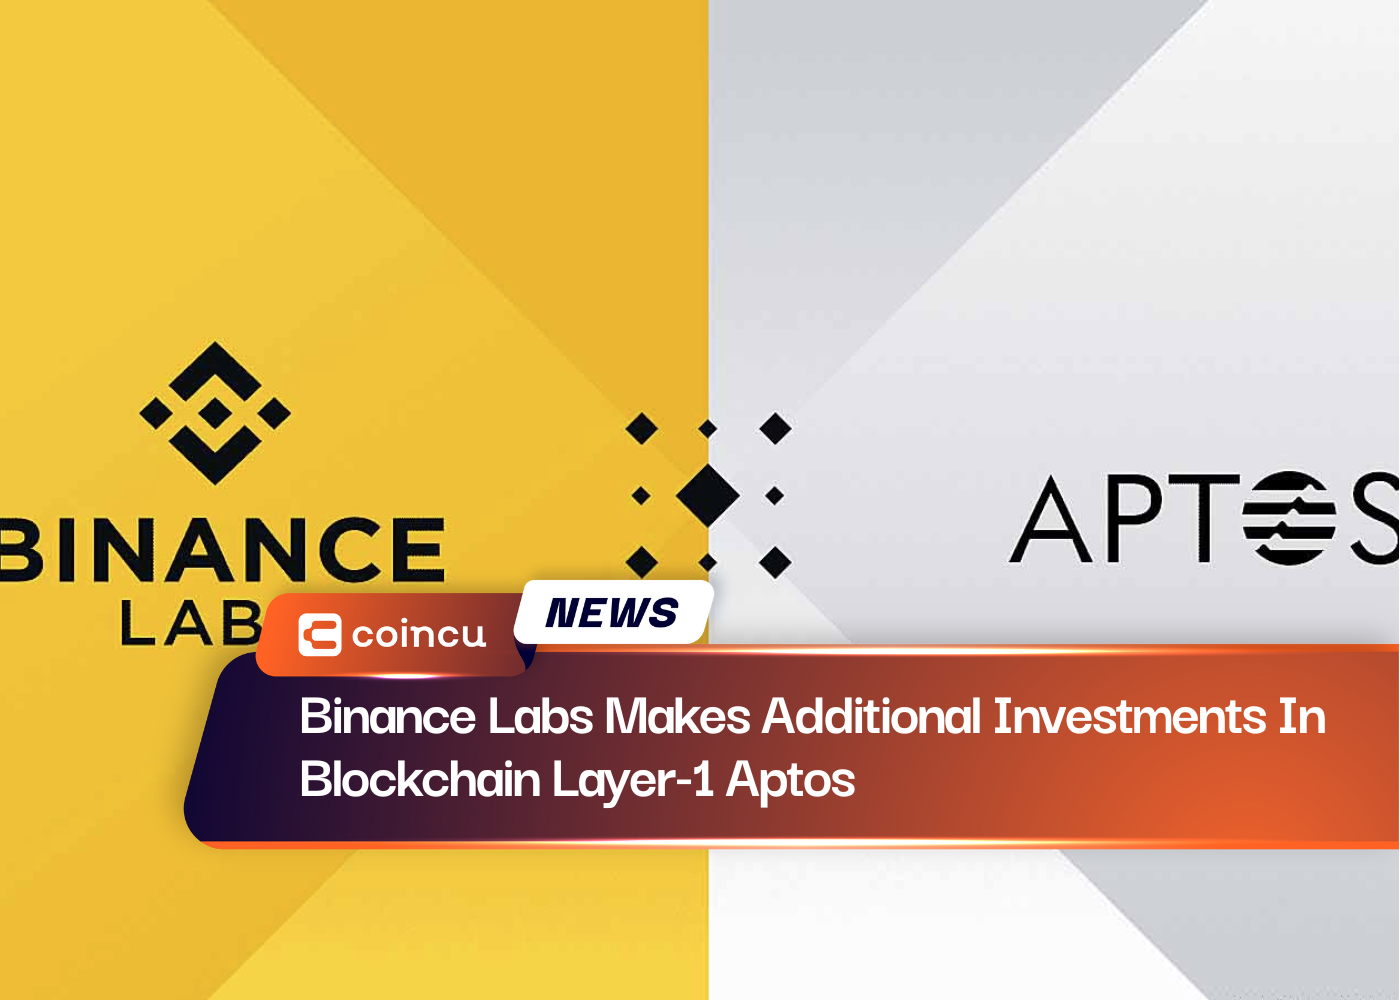 Binance Labs Makes Additional Investments In Blockchain Layer-1 Aptos ...